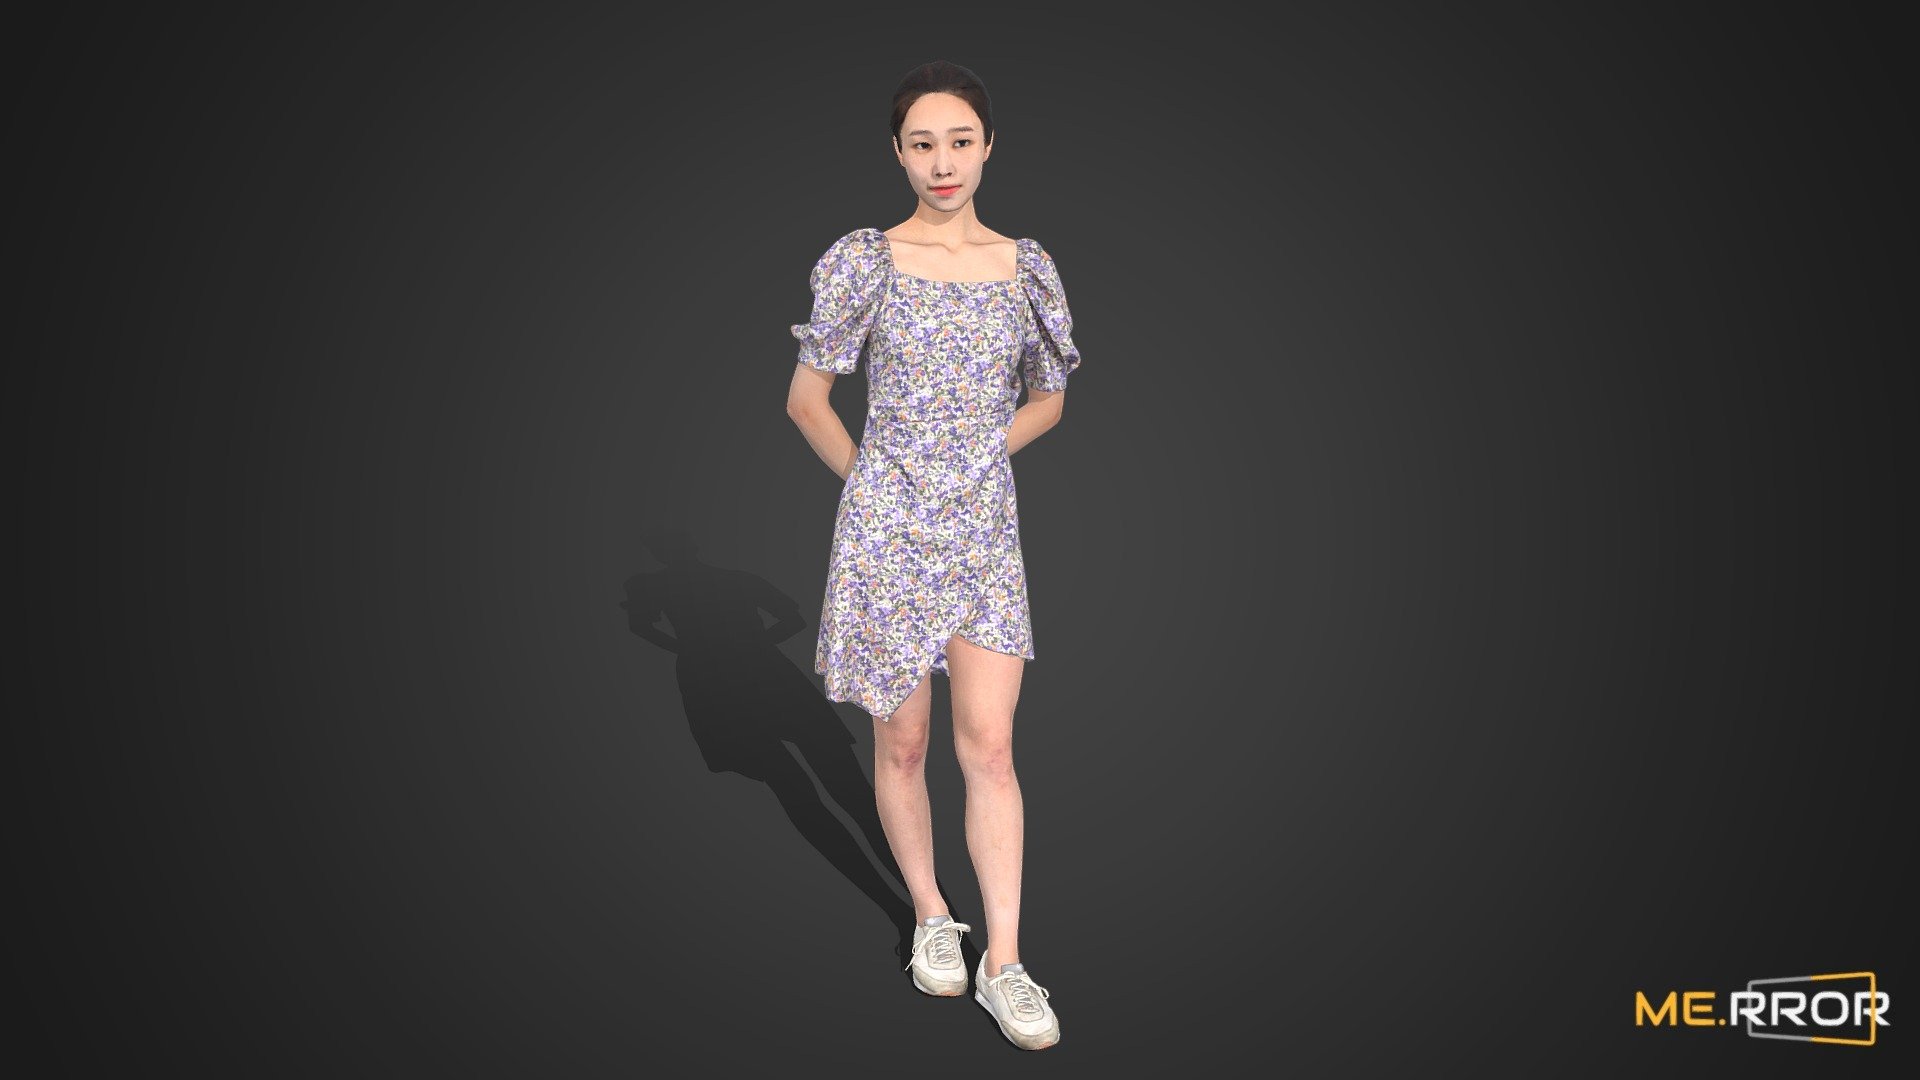 ME.RROR


From 3D models of Asian individuals to a fresh selection of free assets available each month - explore a richer diversity of photorealistic 3D assets at the ME.RROR asset store!

https://me-rror.com/store




[Model Info]




Model Formats : FBX, MAX

Texture Maps (8K) : Diffuse

You can buy this model at https://me-rror.com/asset/human/asset622




Find Scanned - 2M poly version here: https://sketchfab.com/3d-models/b41be69e09244cd6aae3afe141bddcc0

Find the retopologized version here : https://sketchfab.com/3d-models/f3beaeae8b0a4dd2babc10378188bd0f

If you encounter any problems using this model, please feel free to contact us. We'd be glad to help you.



[About ME.RROR]

Step into the future with ME.RROR, South Korea's leading 3D specialist. Bespoke creations are not just possible; they are our specialty.

Service areas:




3D scanning

3D modeling

Virtual human creation

Inquiries: https://merror.channel.io/lounge - Asian Woman Scan_Posed 9 30k poly - 3D model by ME.RROR (@merror) 3d model